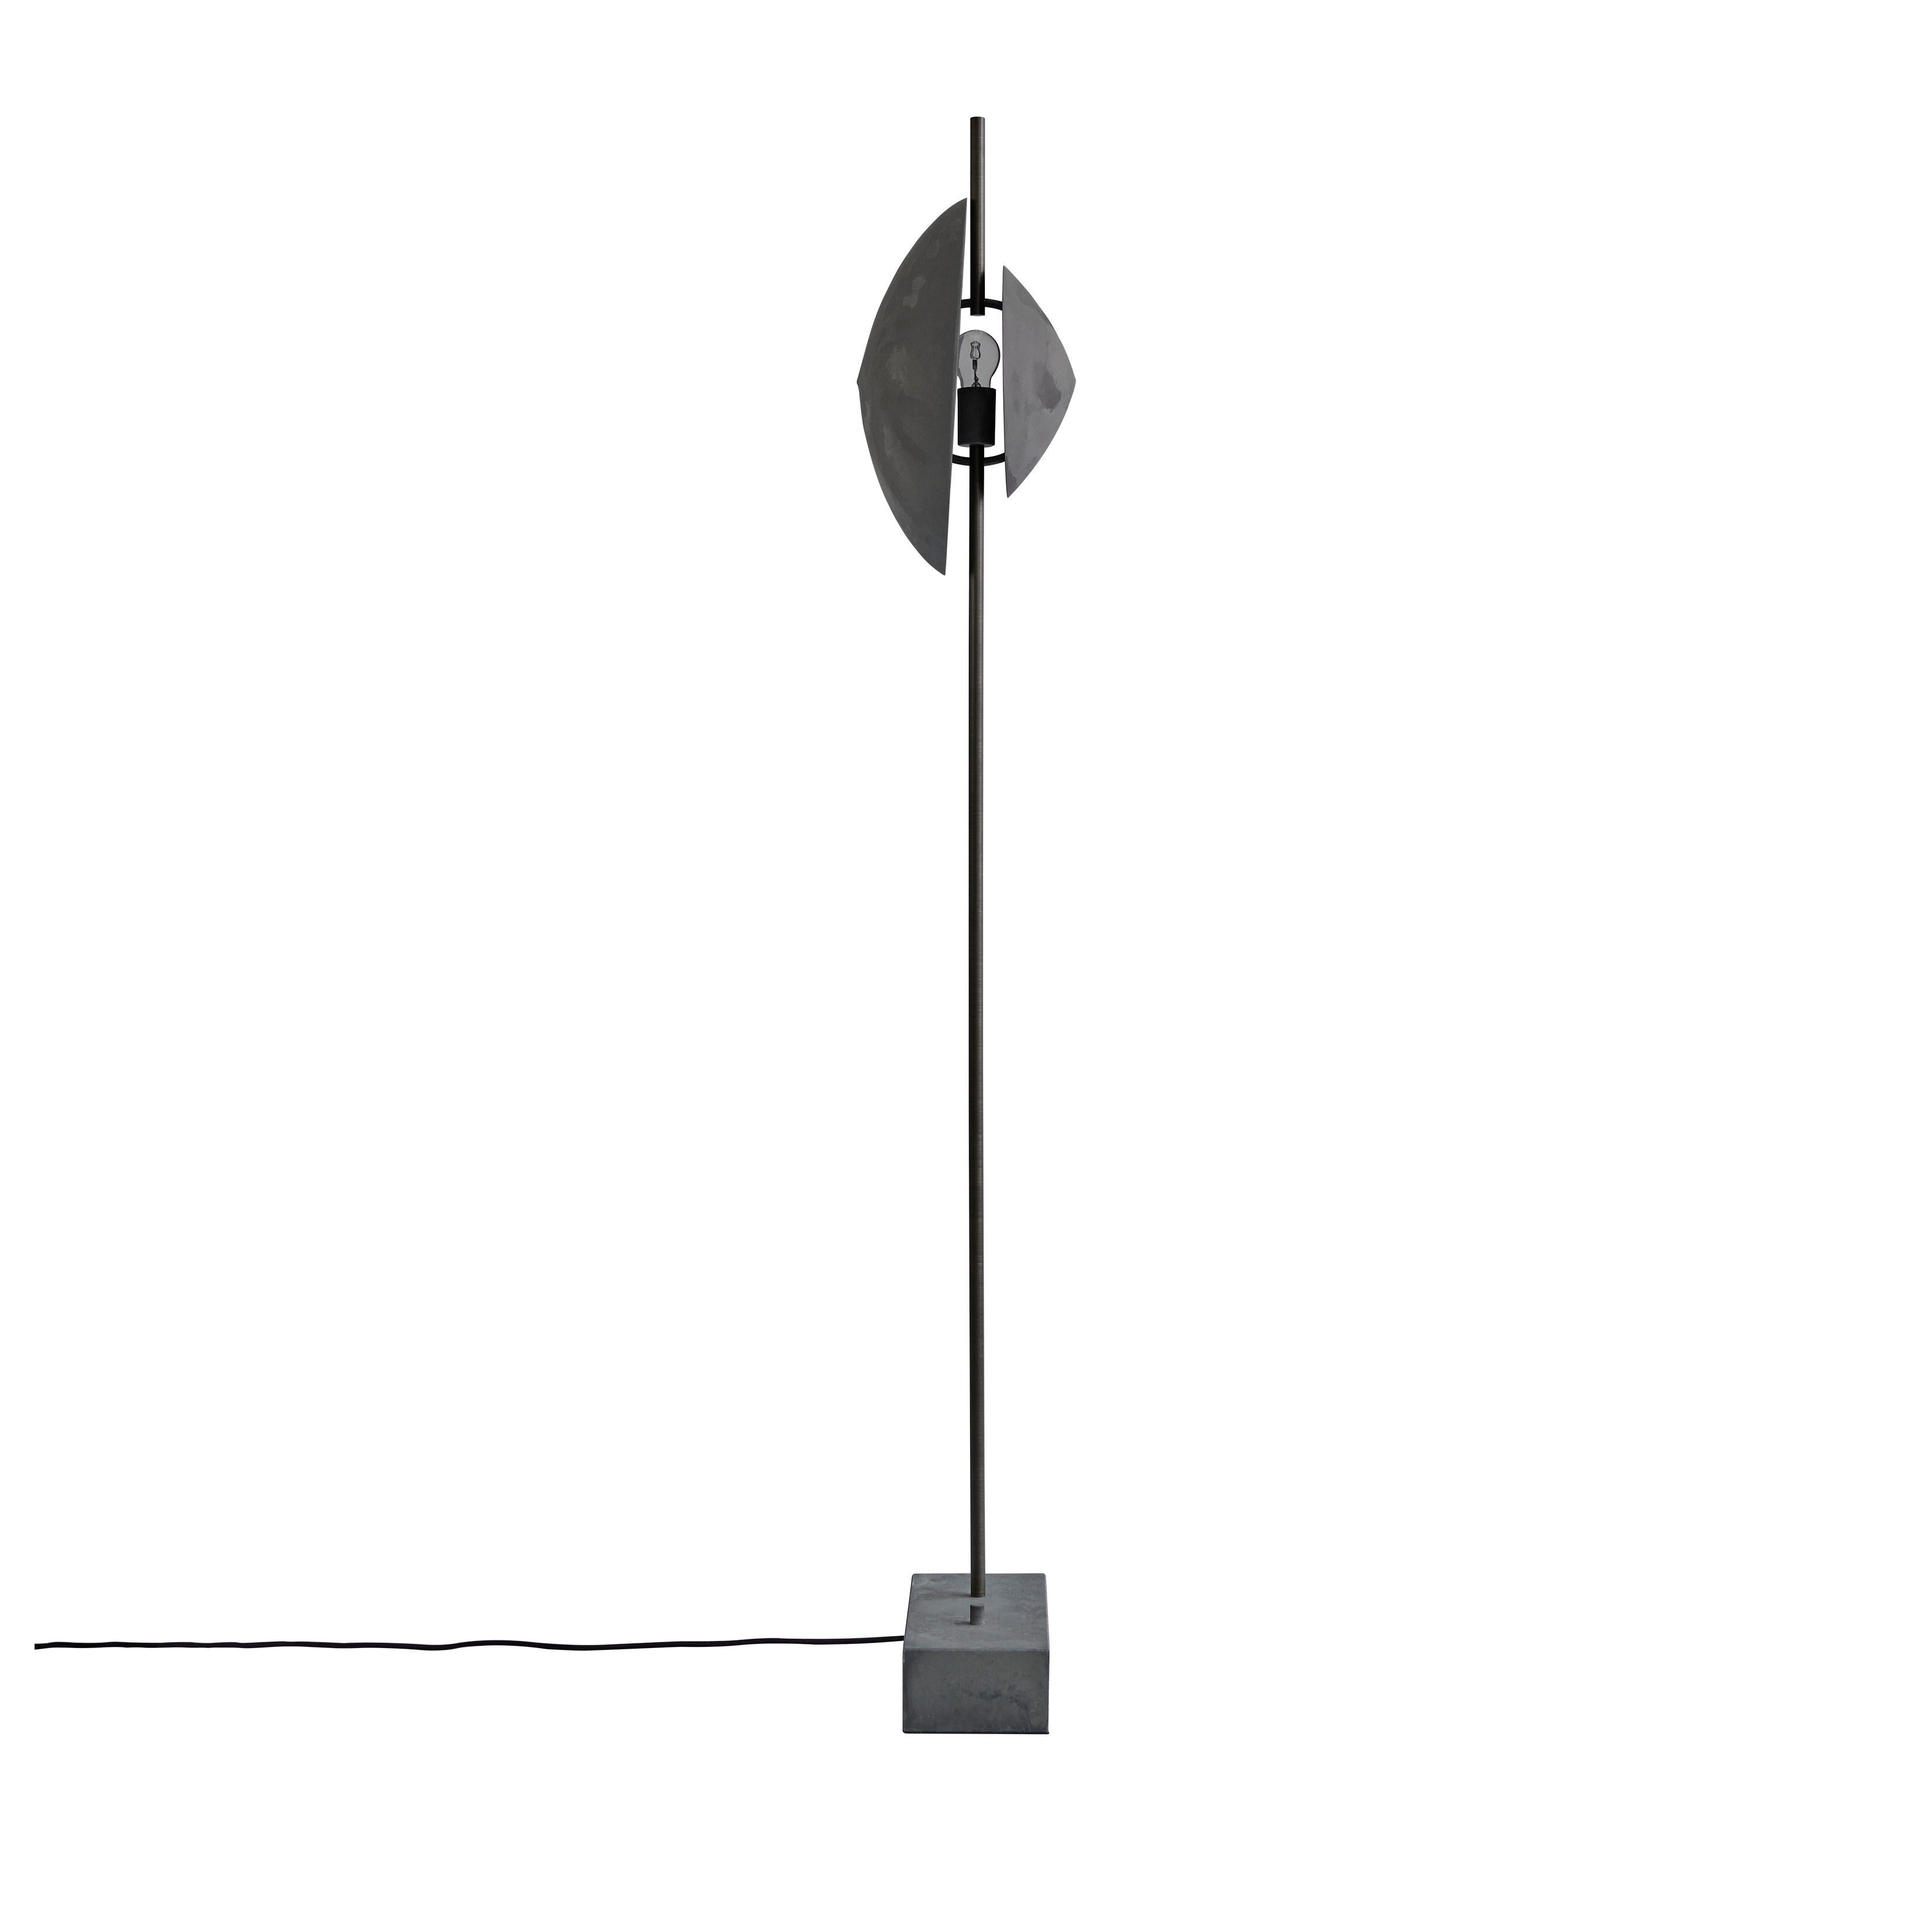 Dawn floor lamp by 101 Copenhagen
Designed by Kristian Sofus Hansen & Tommy Hyldahl.
Dimensions: L 30 x W 40 x H 168 cm
Cable length: 200 CM

Materials: Metal: Aluminum / Oxidezed
Cable: Fabric covered cable / Black
This product is not wired for